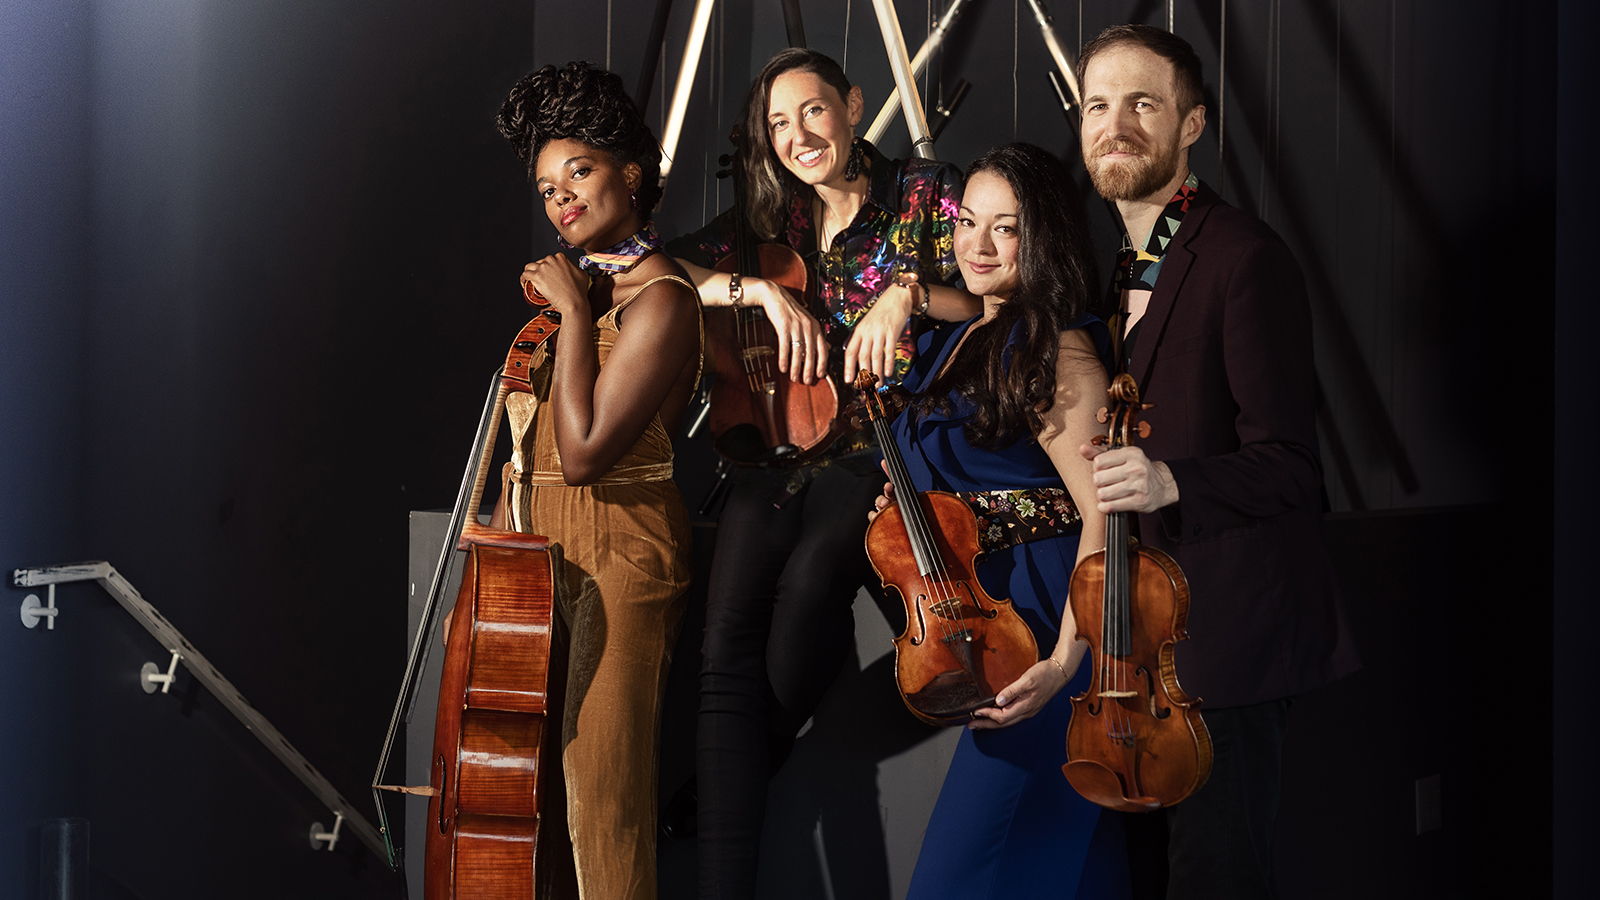 Thalea String Quartet, from left to right: Titilayo Ayangade with a cello, Lauren Spalding with a viola, Kumiko Sakamoto with a violin, and Christopher Whitley with a violin.